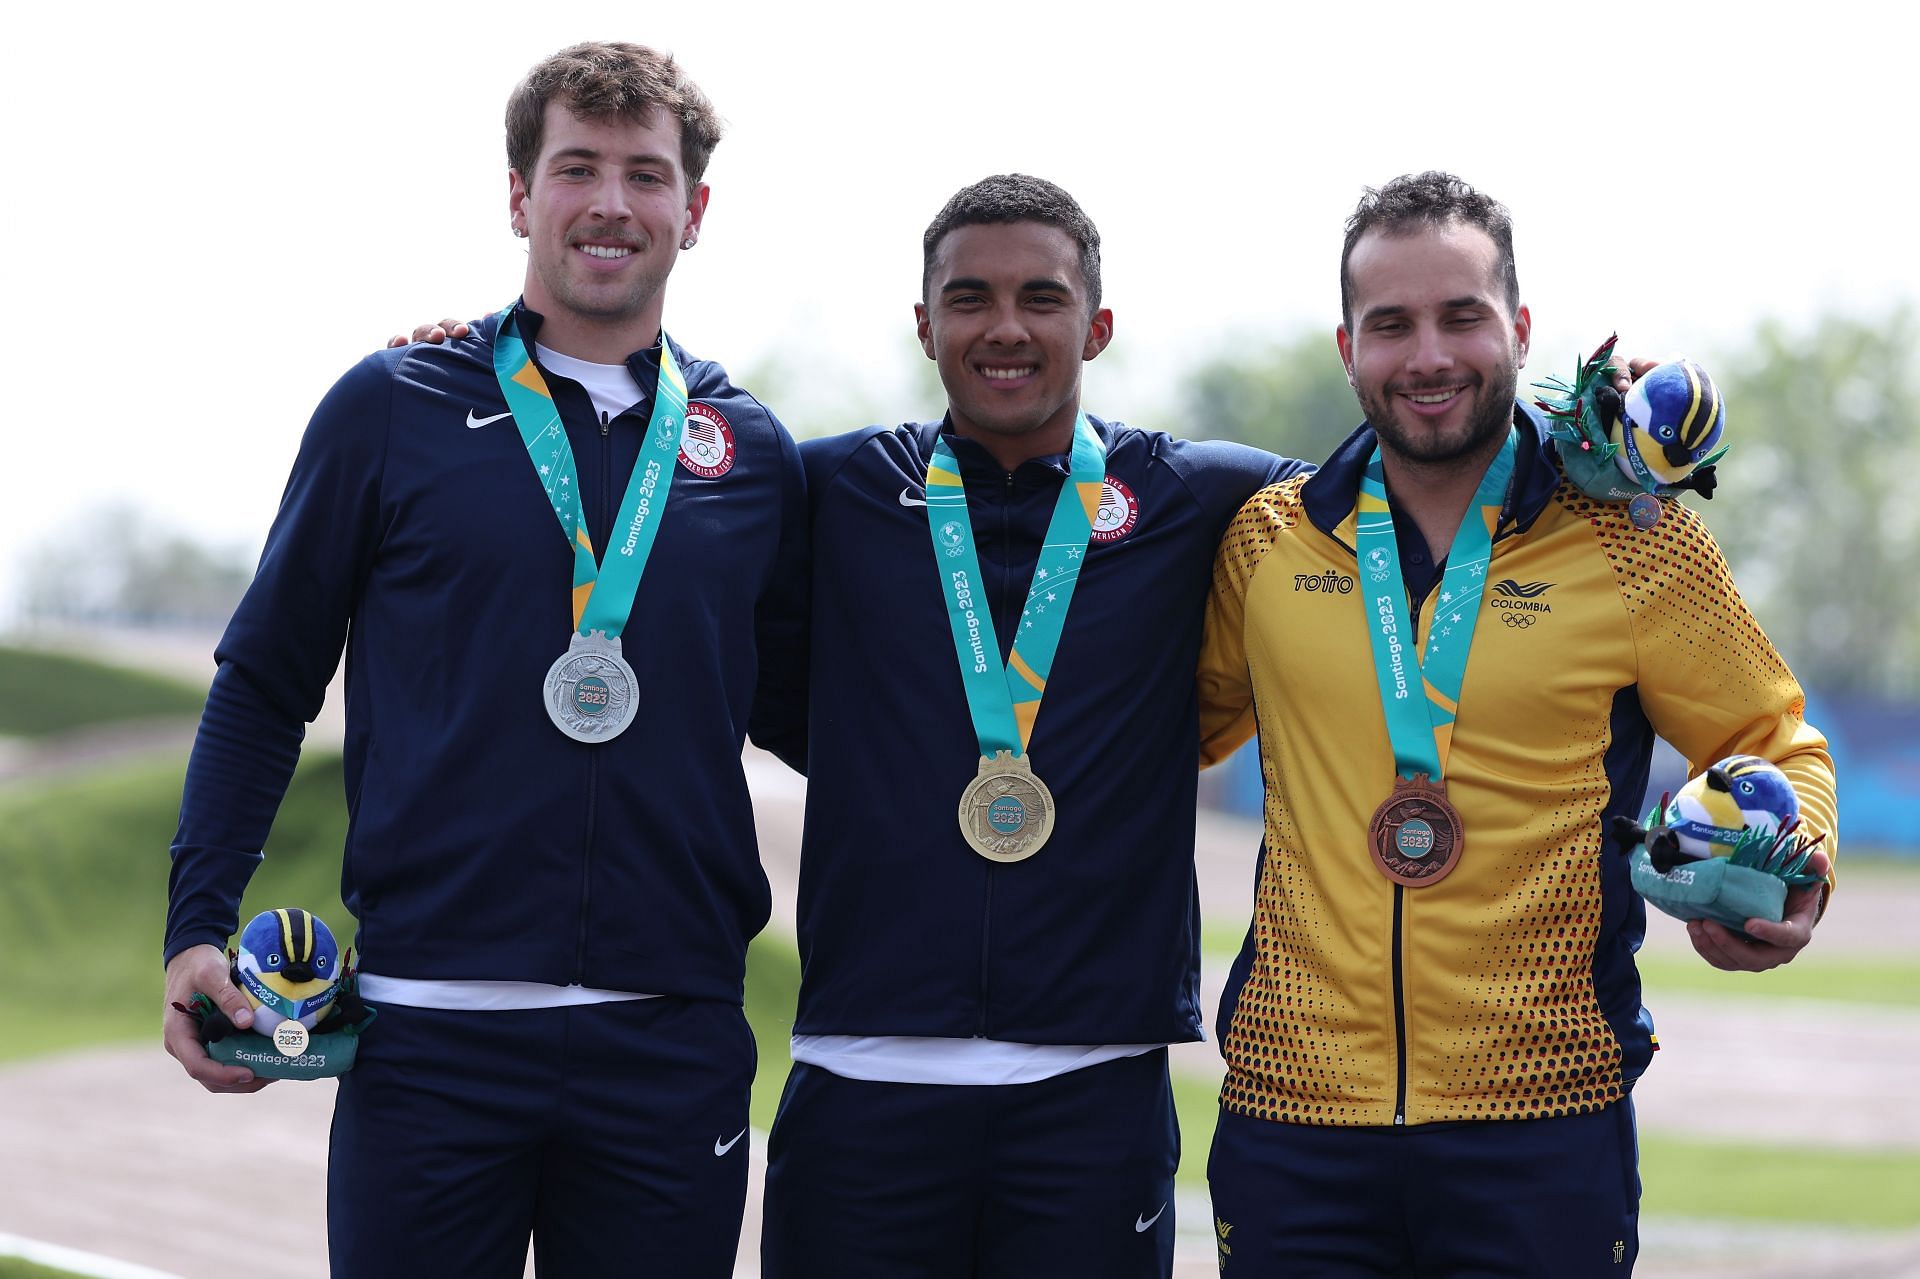 Games-Chile win first Pan Am gold as US flex medal muscles - CNA